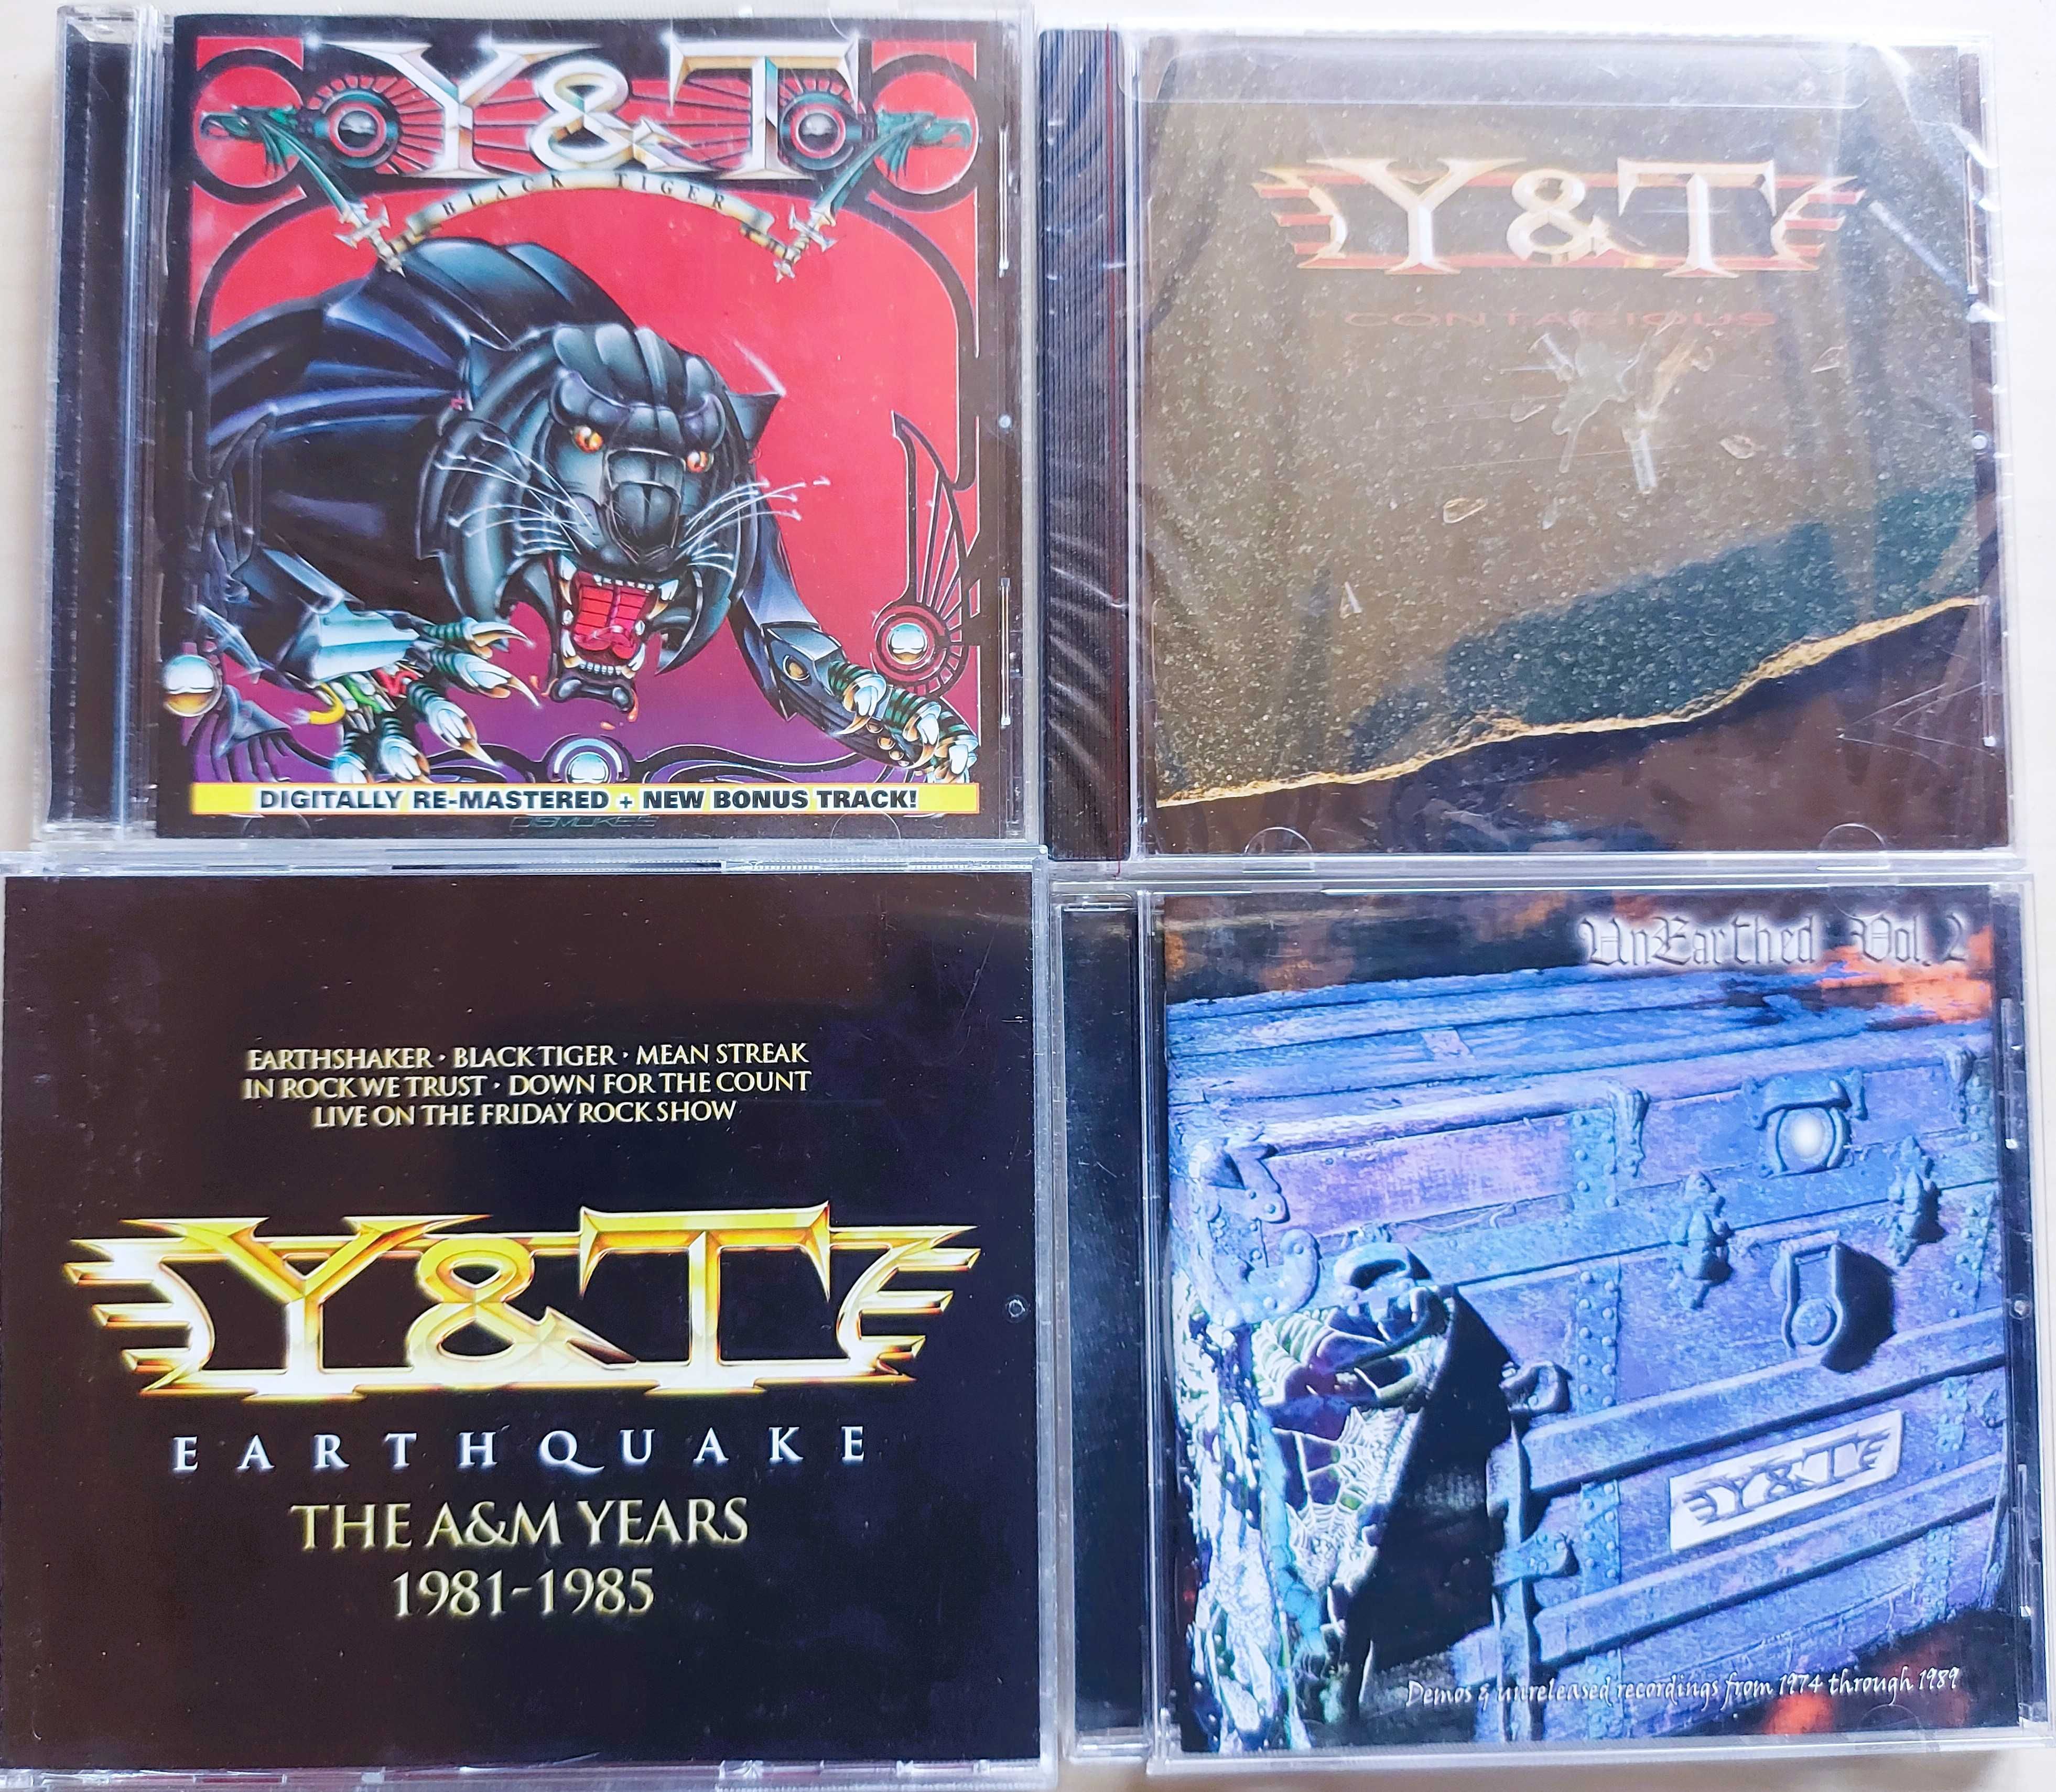 CD Y&T Black Tiger legenda NWOBHM tanio Yesterday And Today